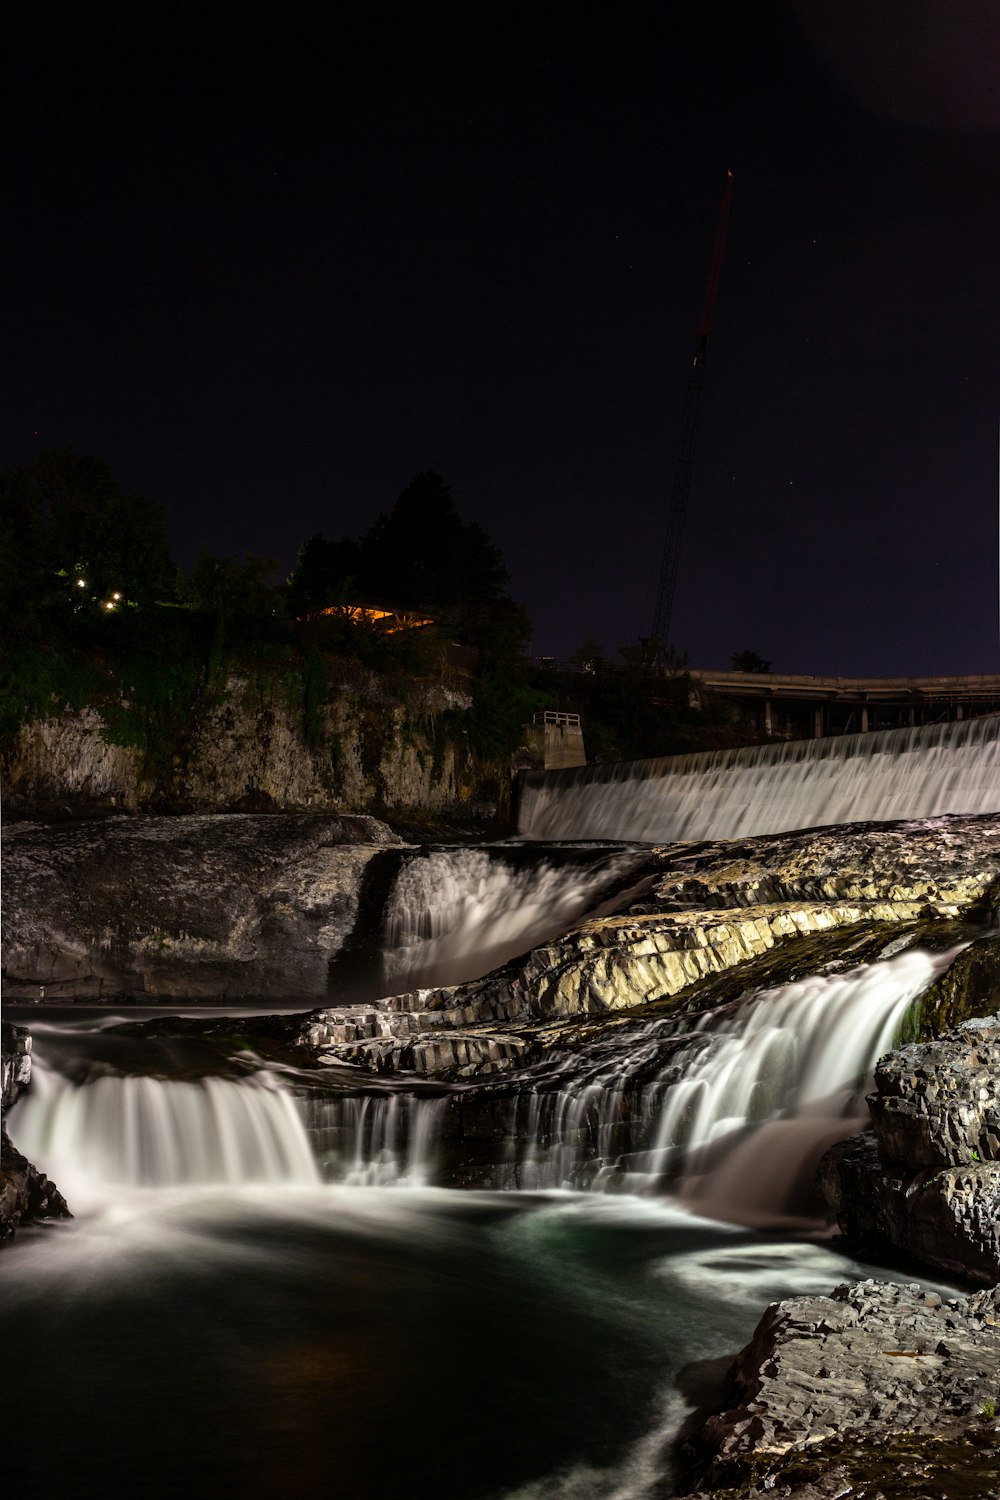 time lapse photography of water falls during night time